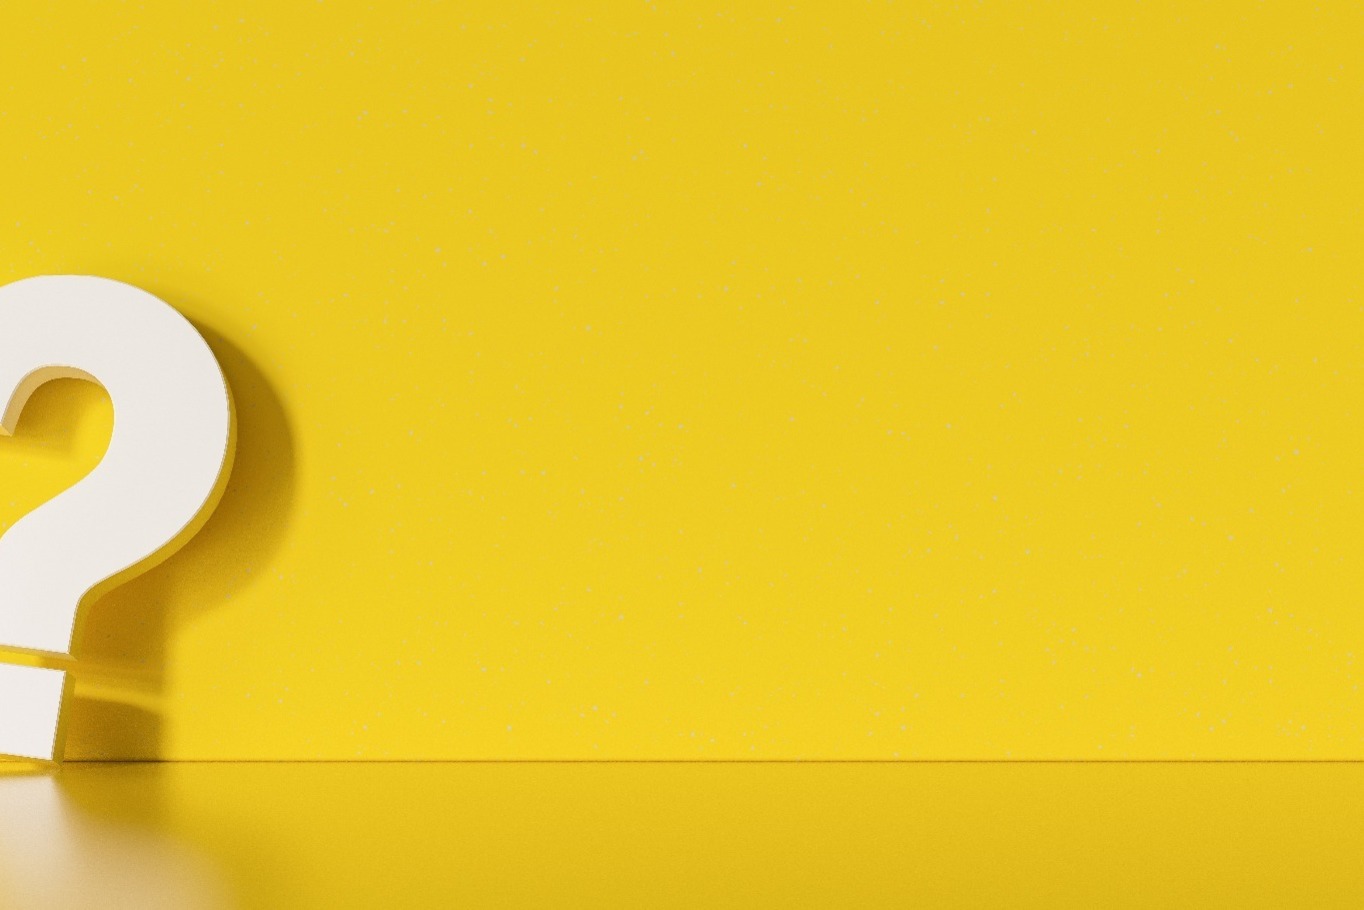 A large, white question mark (3D) against a yellow background.